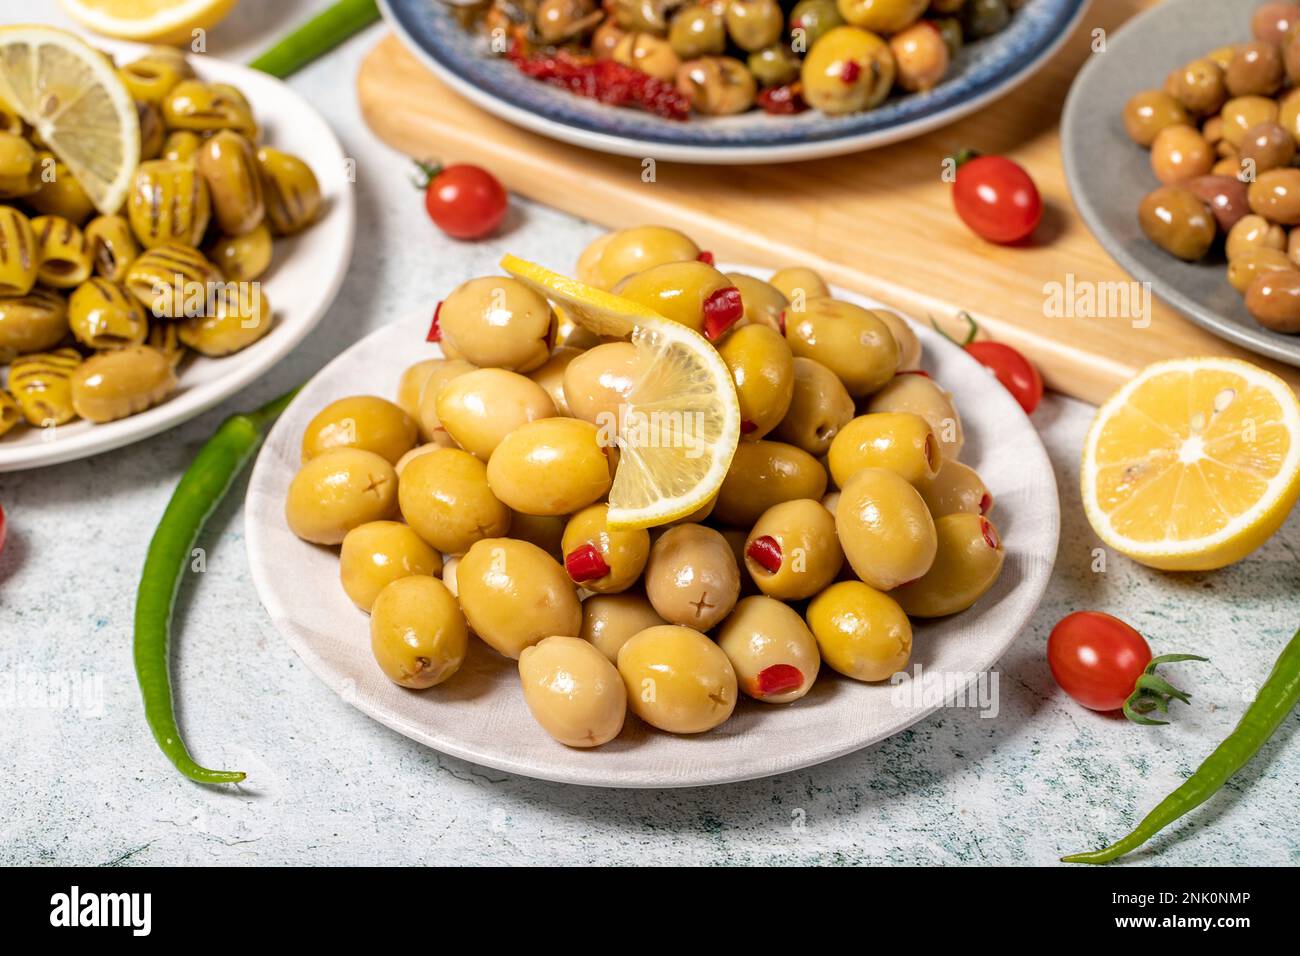 Olive varieties. Assortment of black and green olives on plate on gray background Stock Photo